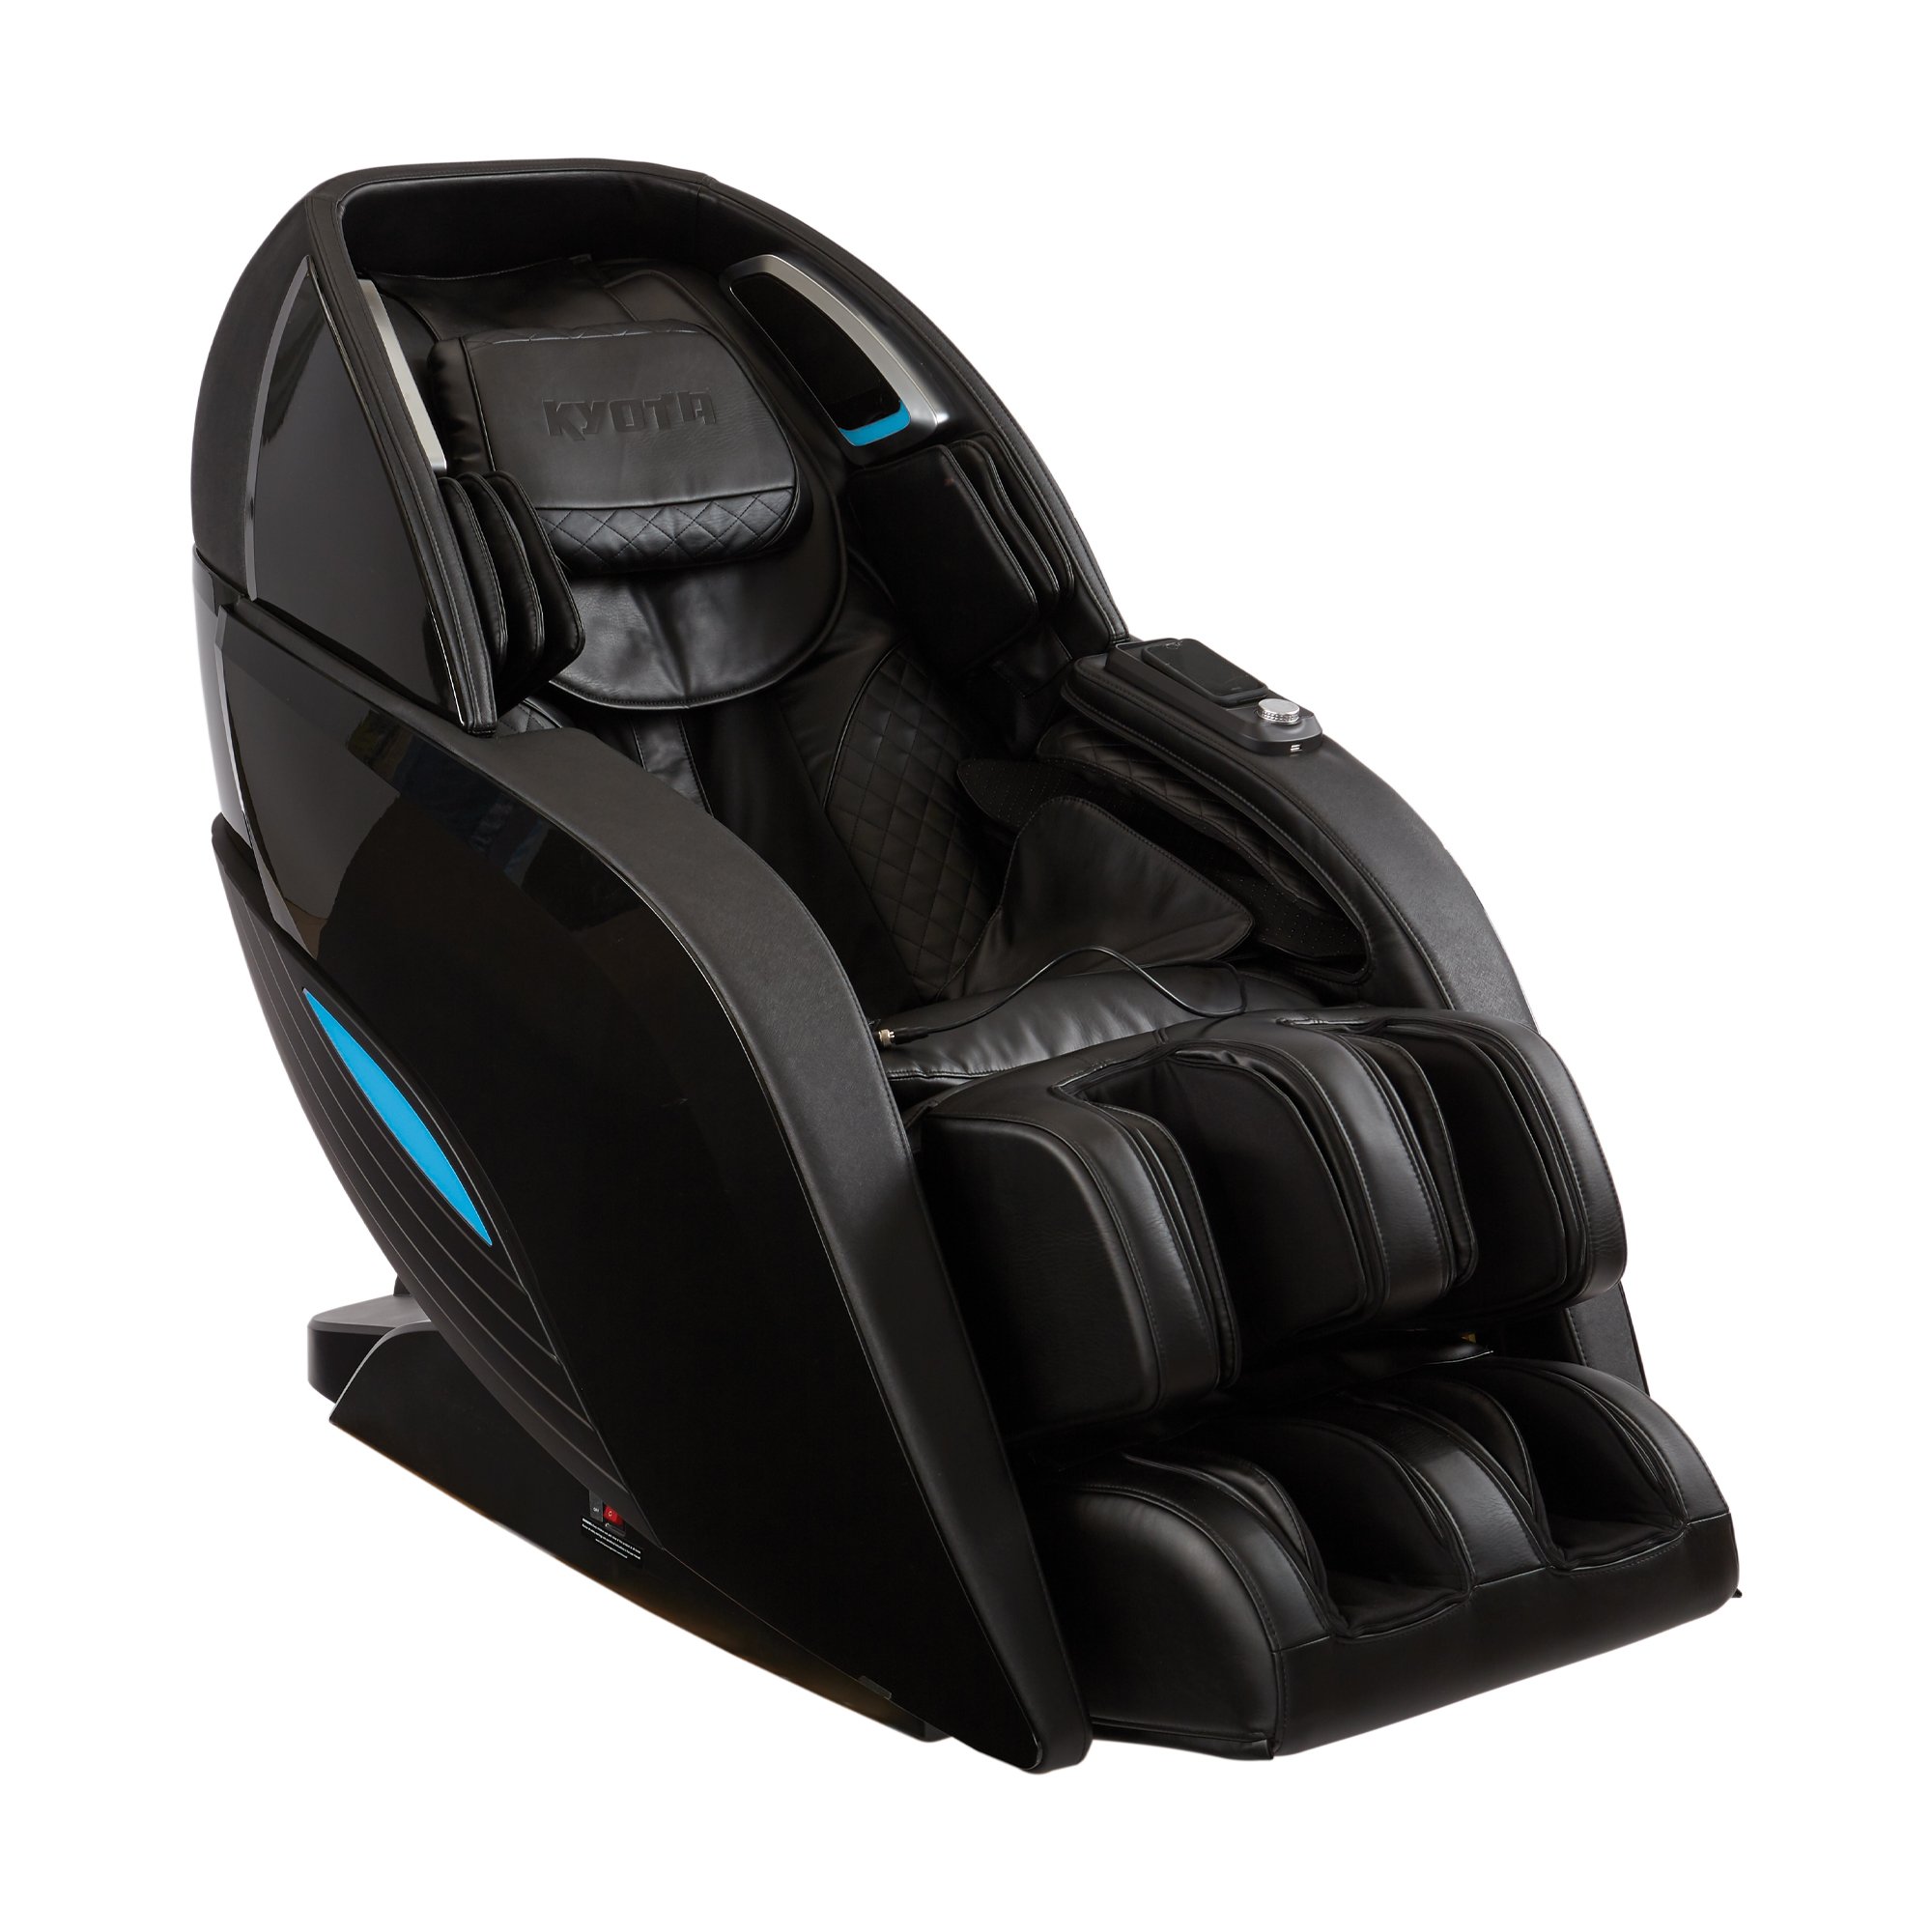 Kneading Massage Chairs: What to Look For